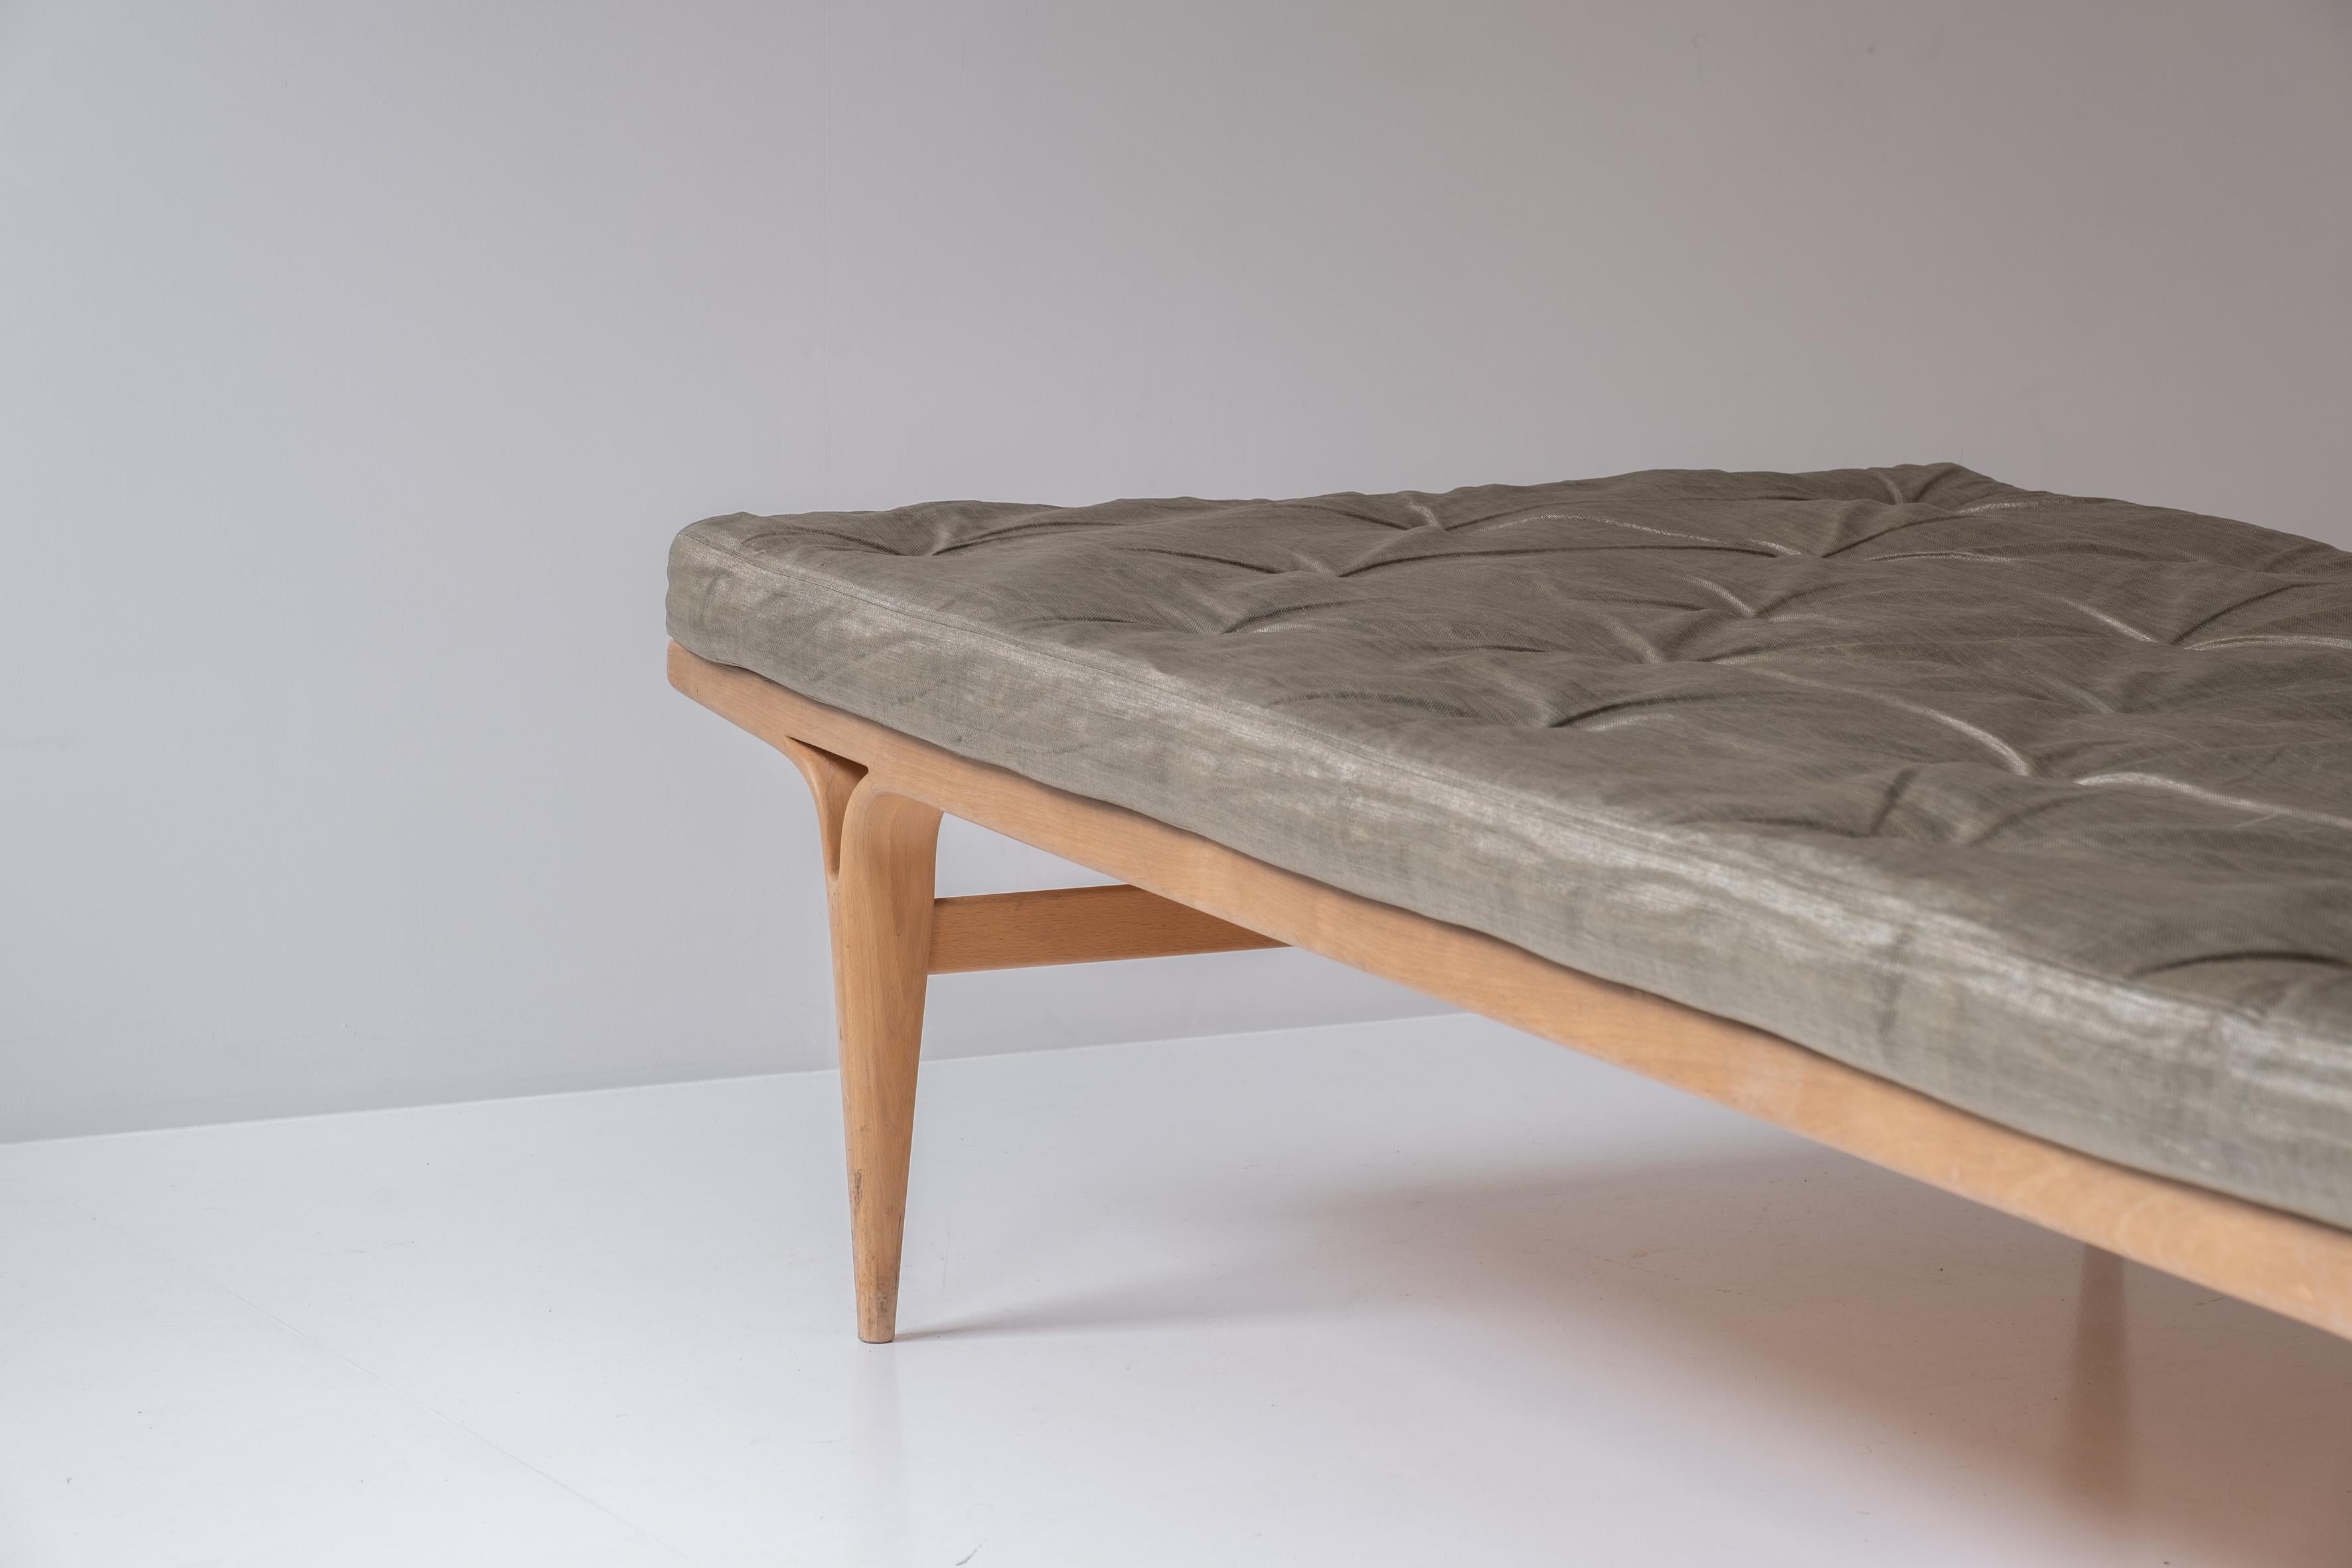 Rare ‘Berlin’ daybed by Bruno Mathsson for Firma Karl Mathsson, Sweden 1969 For Sale 3